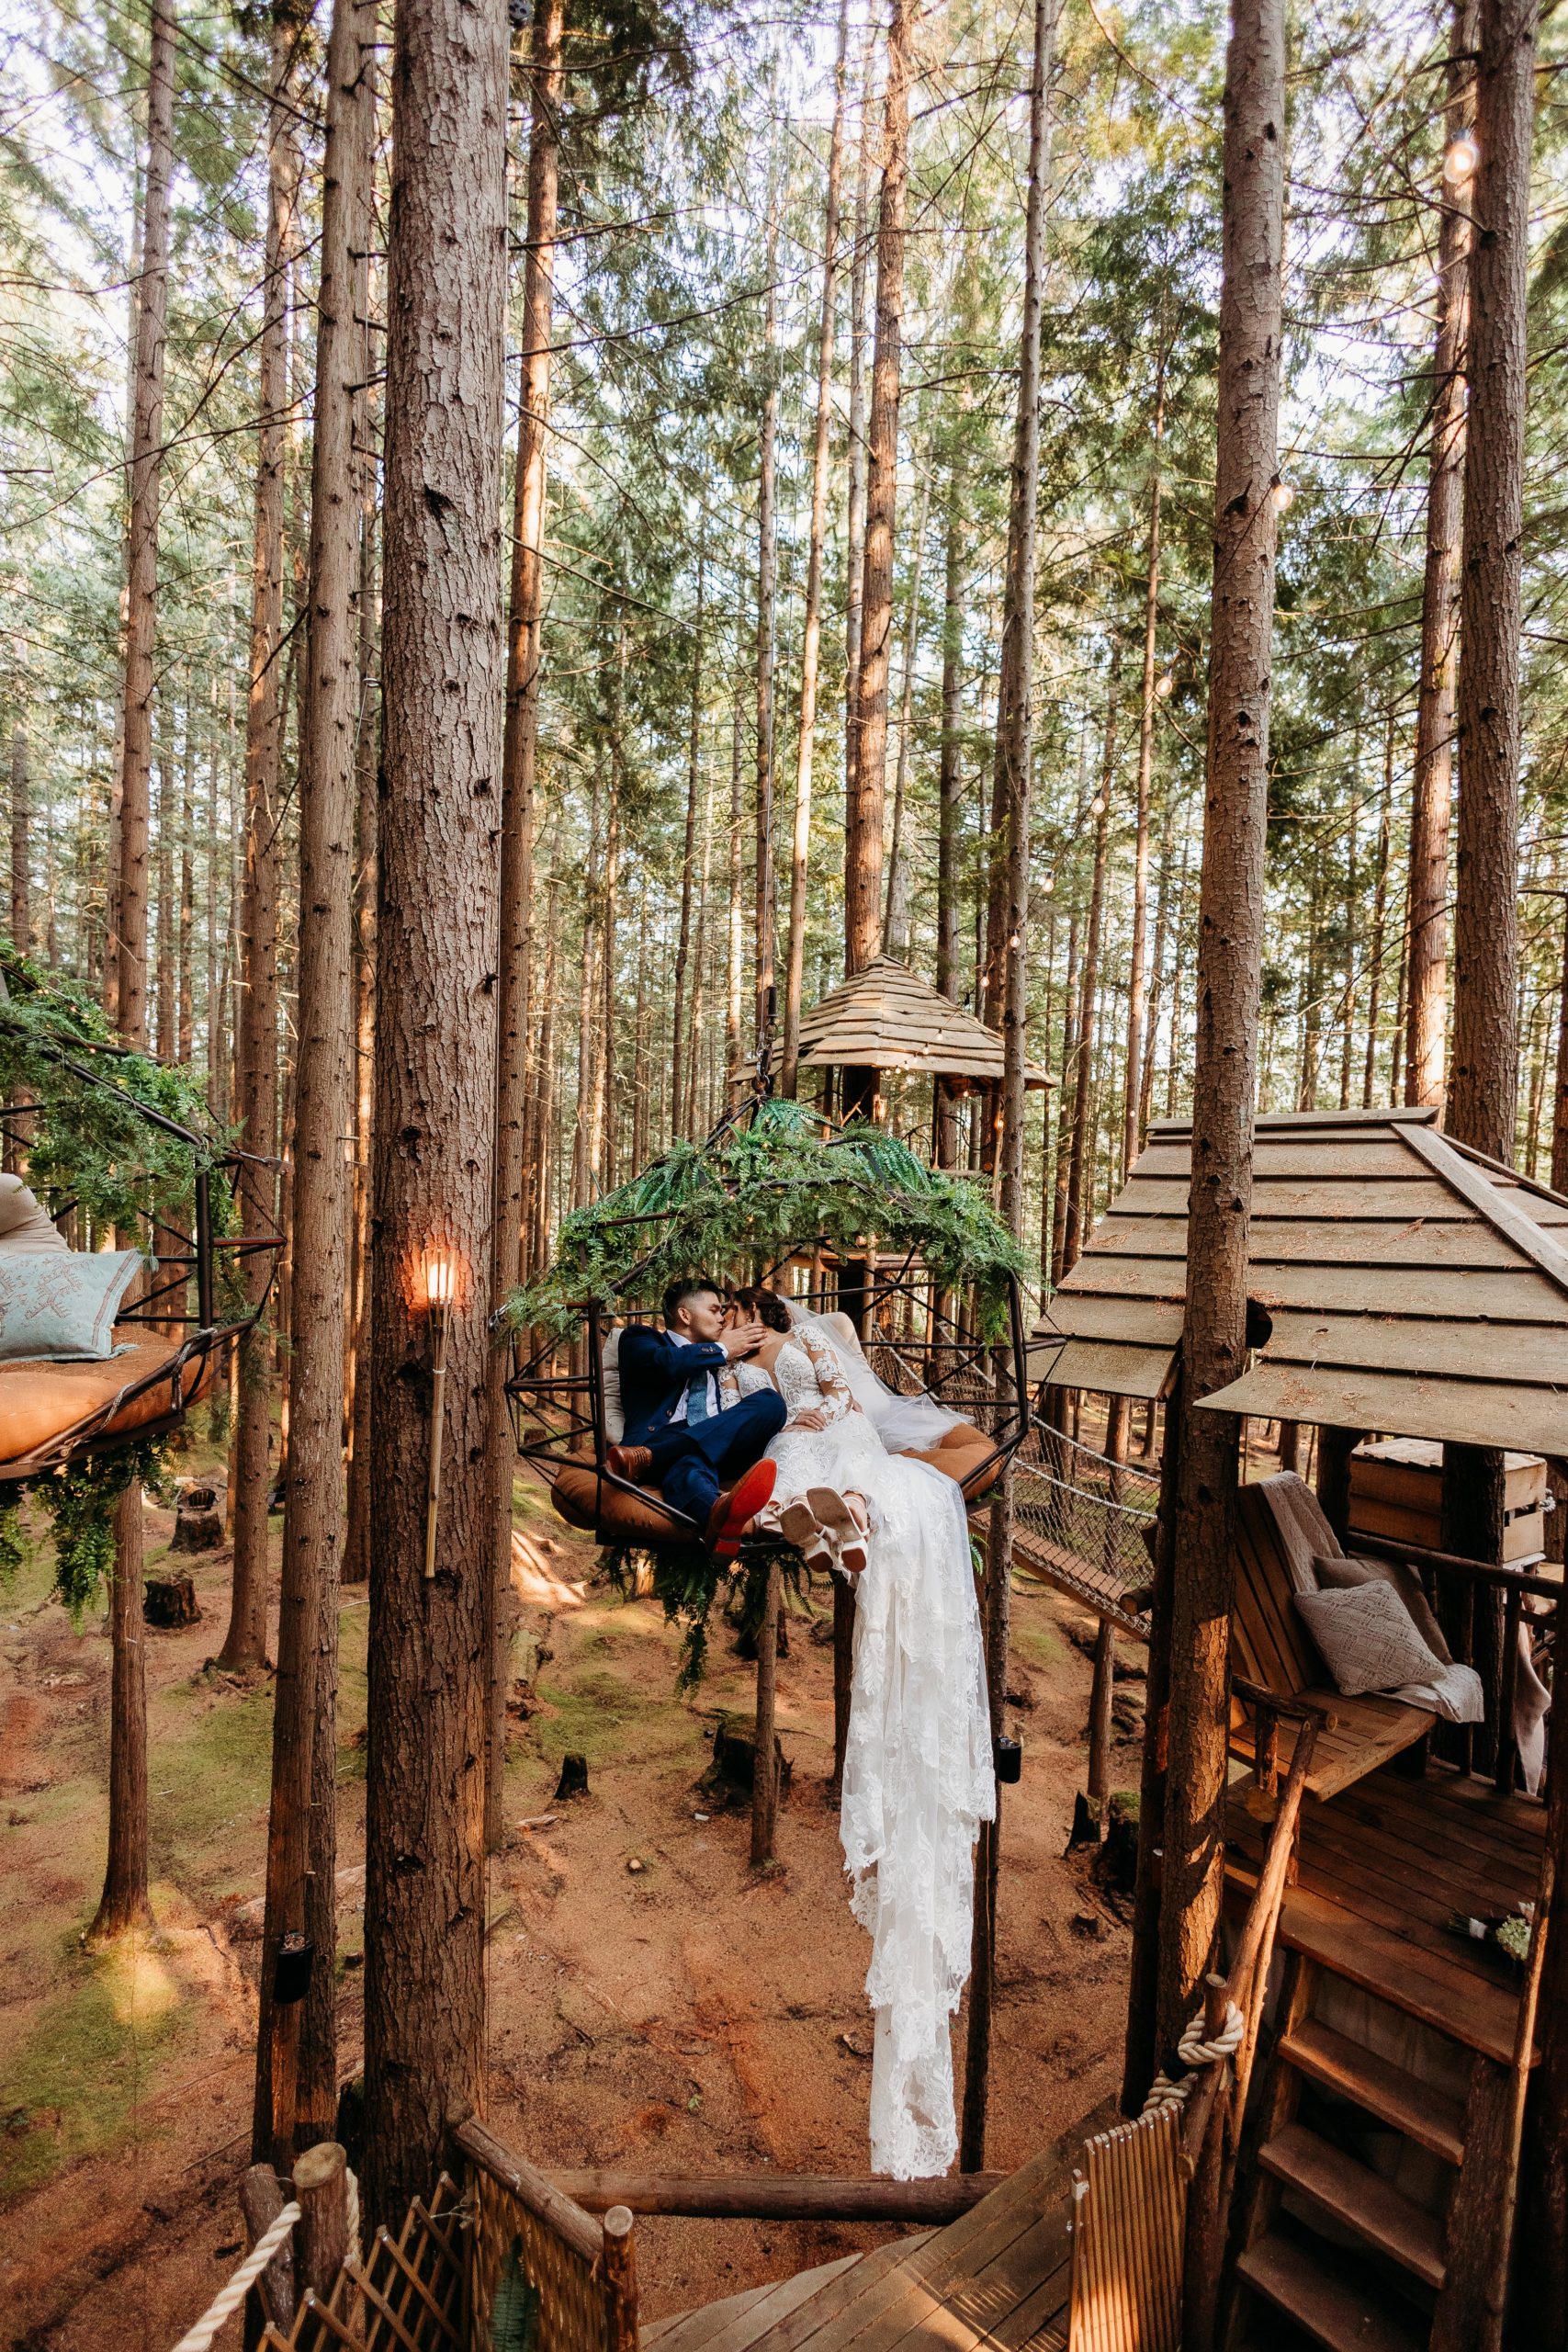 Couple eloping at Emerald Forest, an intimate PNW wedding venue. Photo by Megan Montalvo Photography.